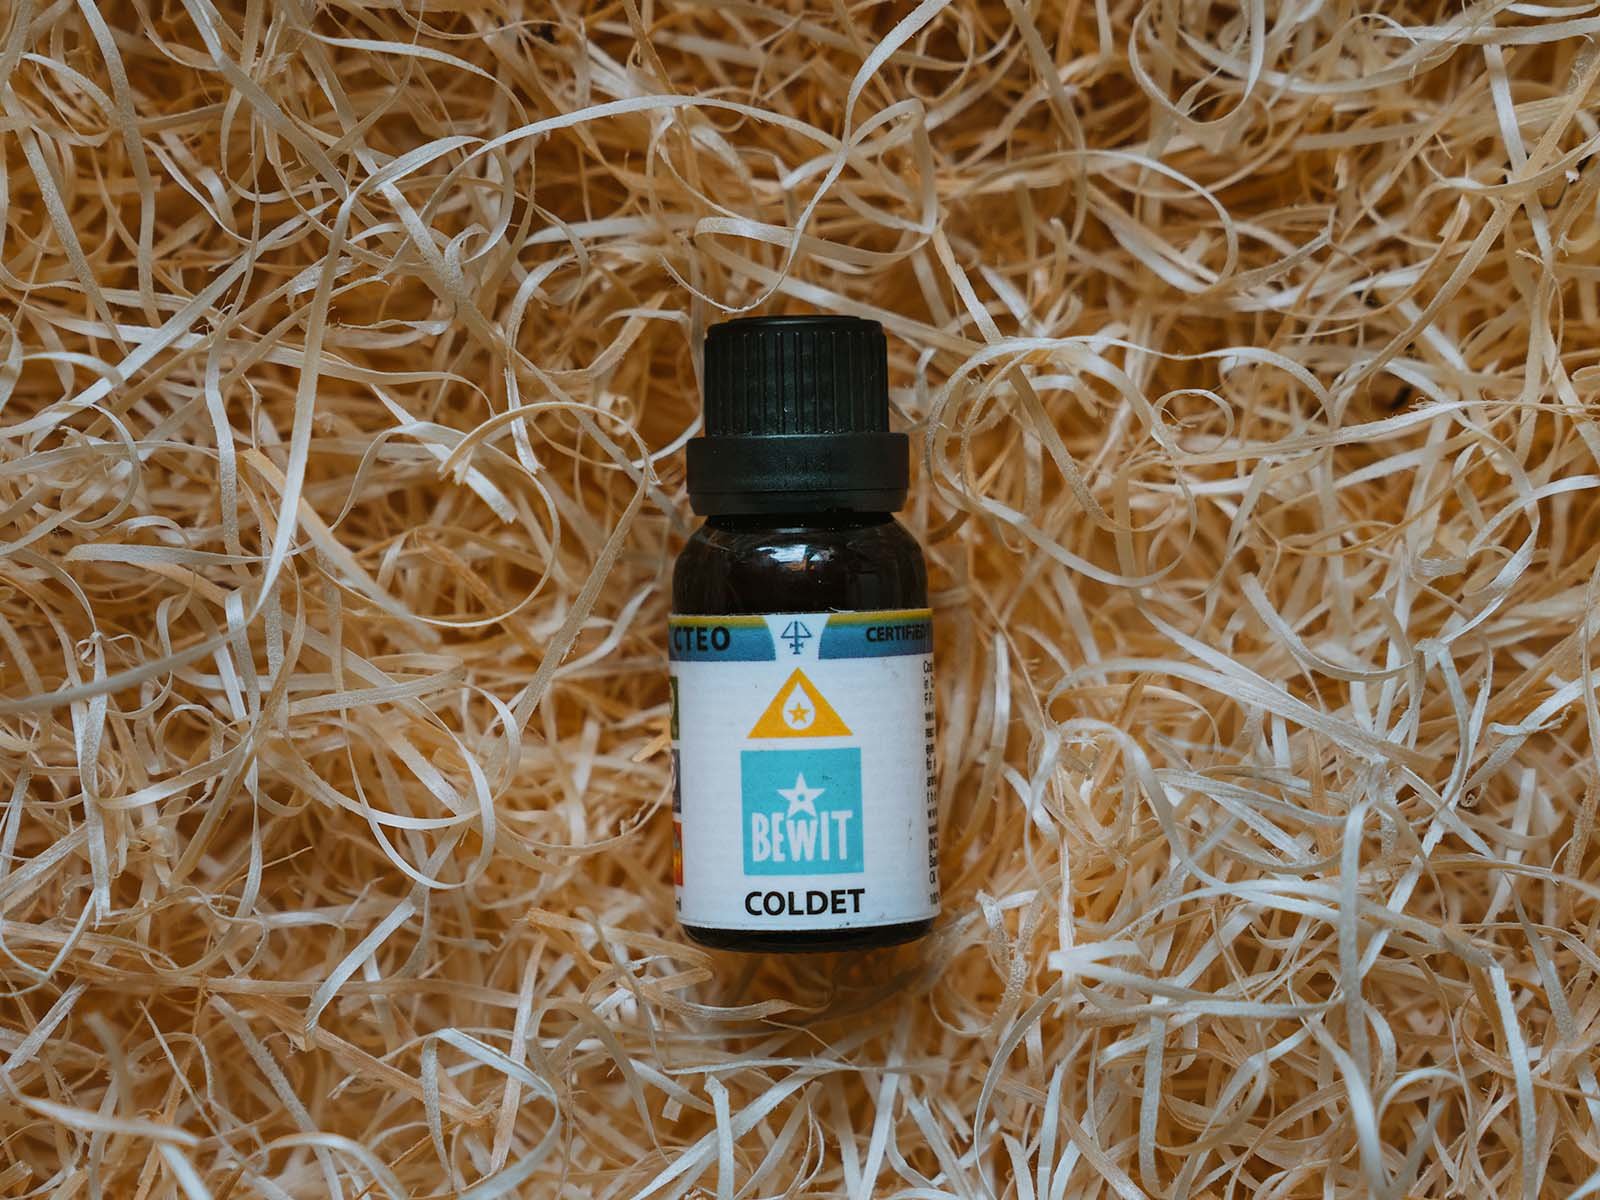 BEWIT COLDET - This is a blend of pure essential oils - 3